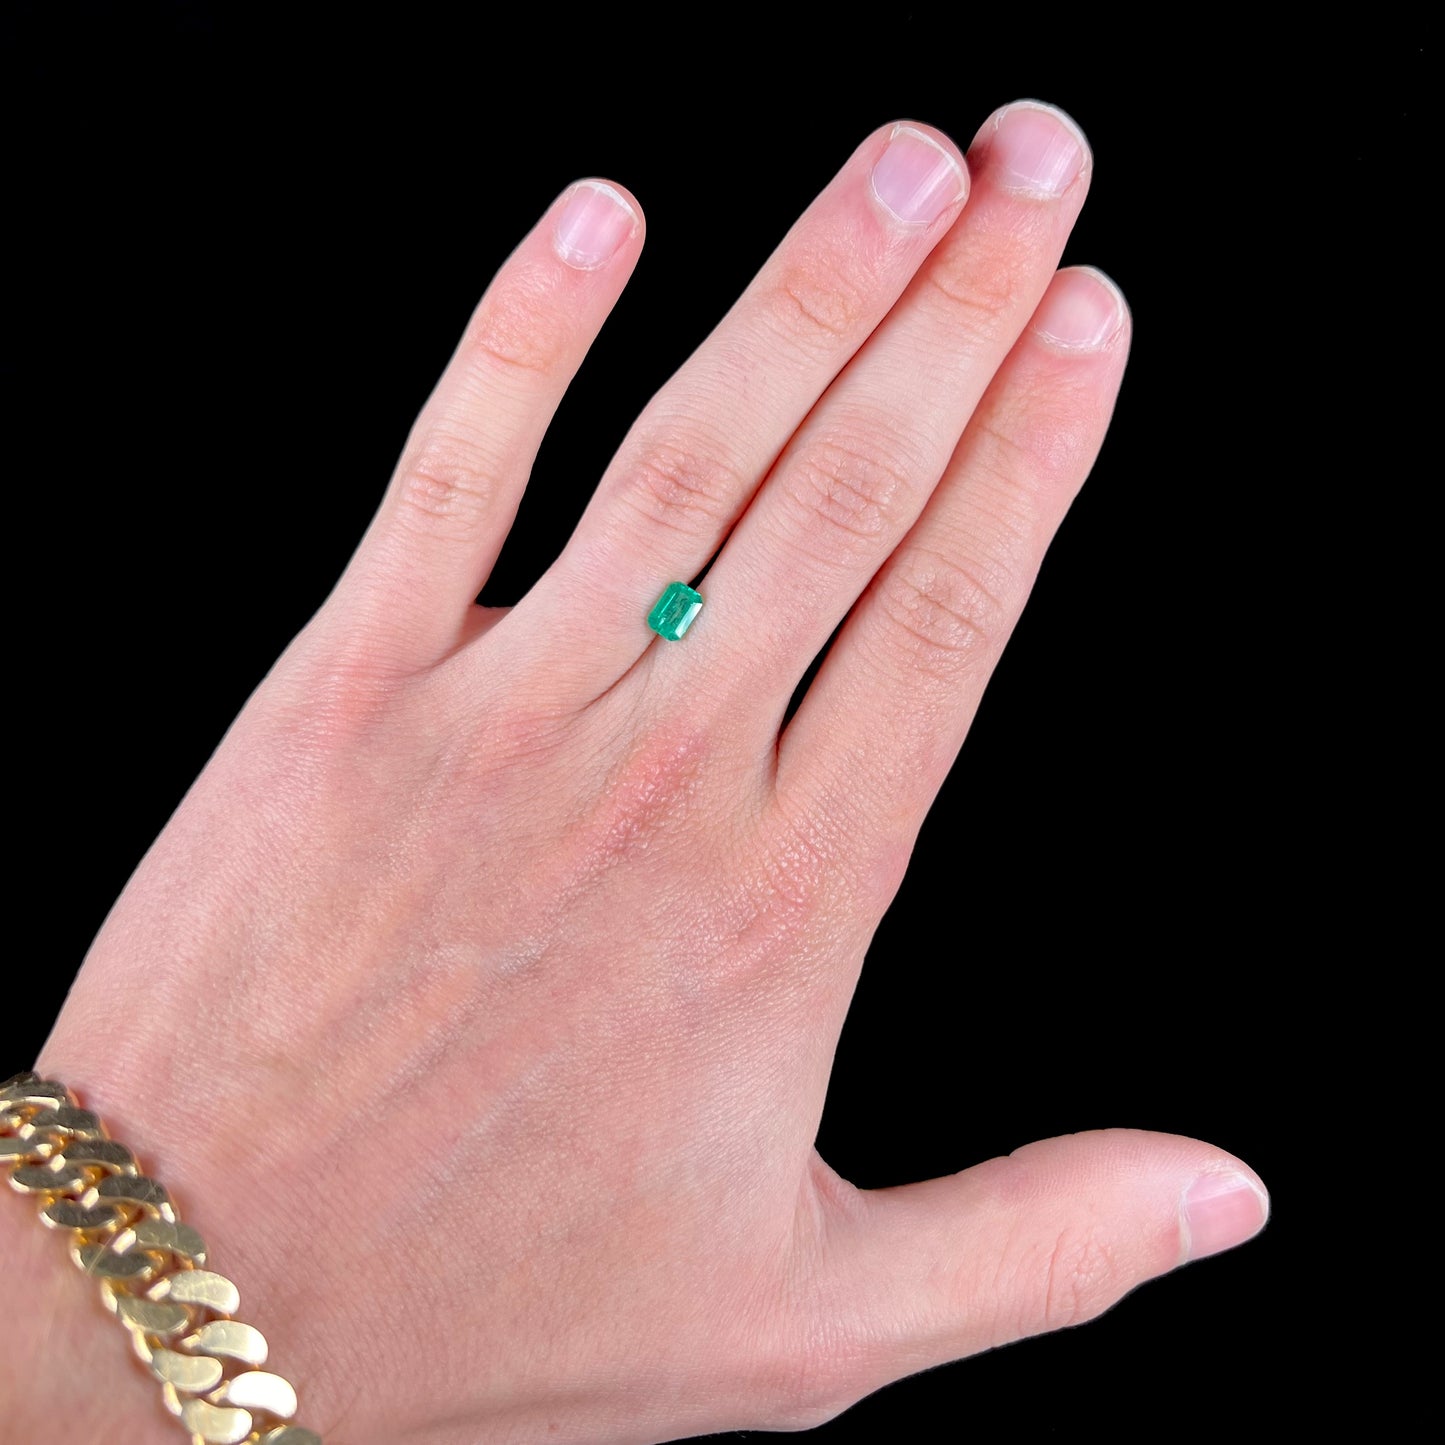 A loose, natural emerald gemstone.  The stone is emerald cut.